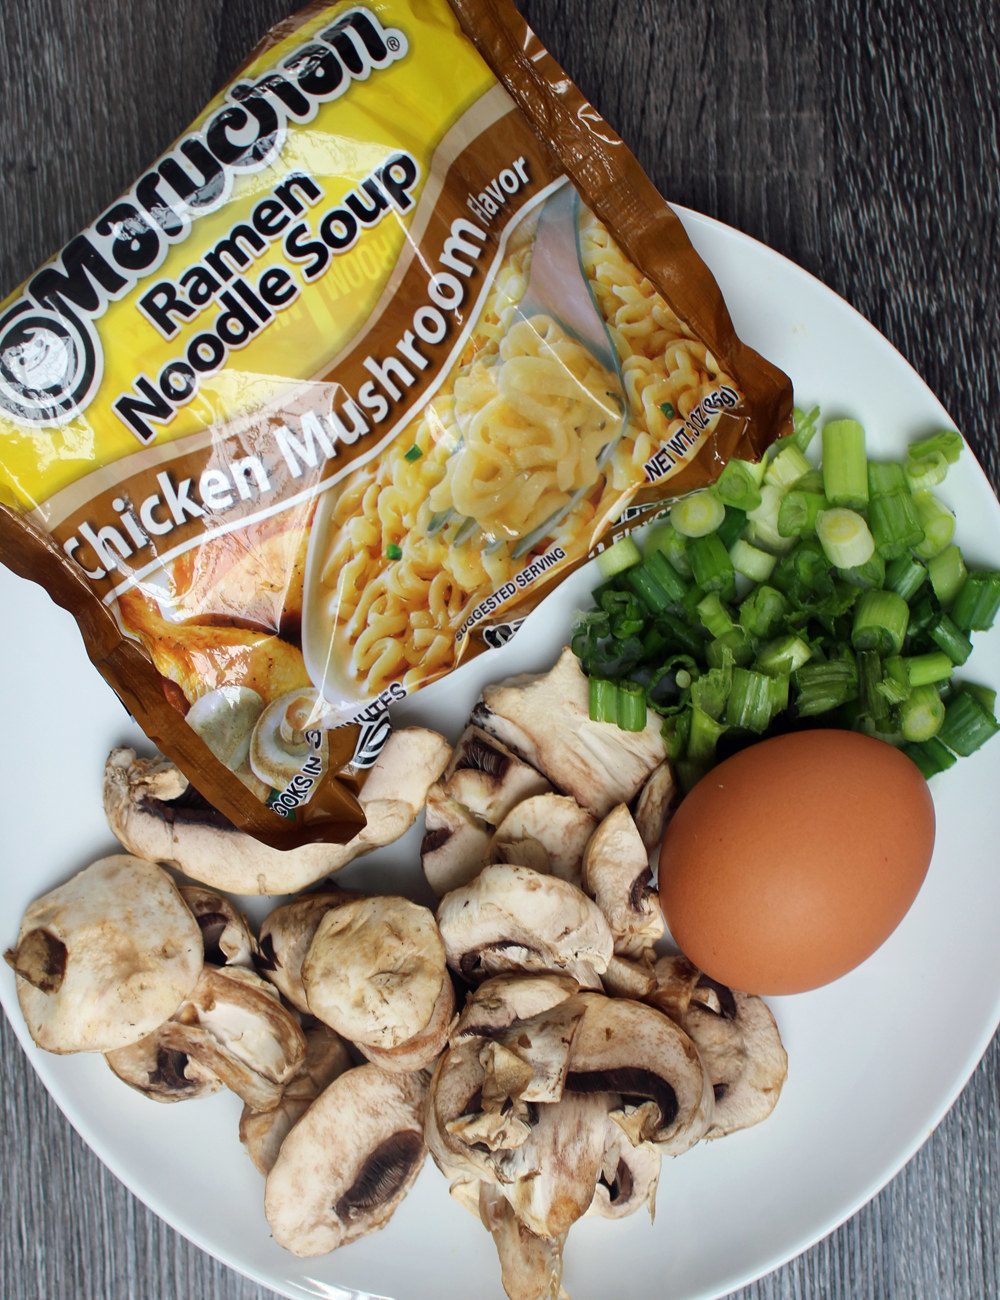 Mushrooms, an egg, and packaged instant ramen.